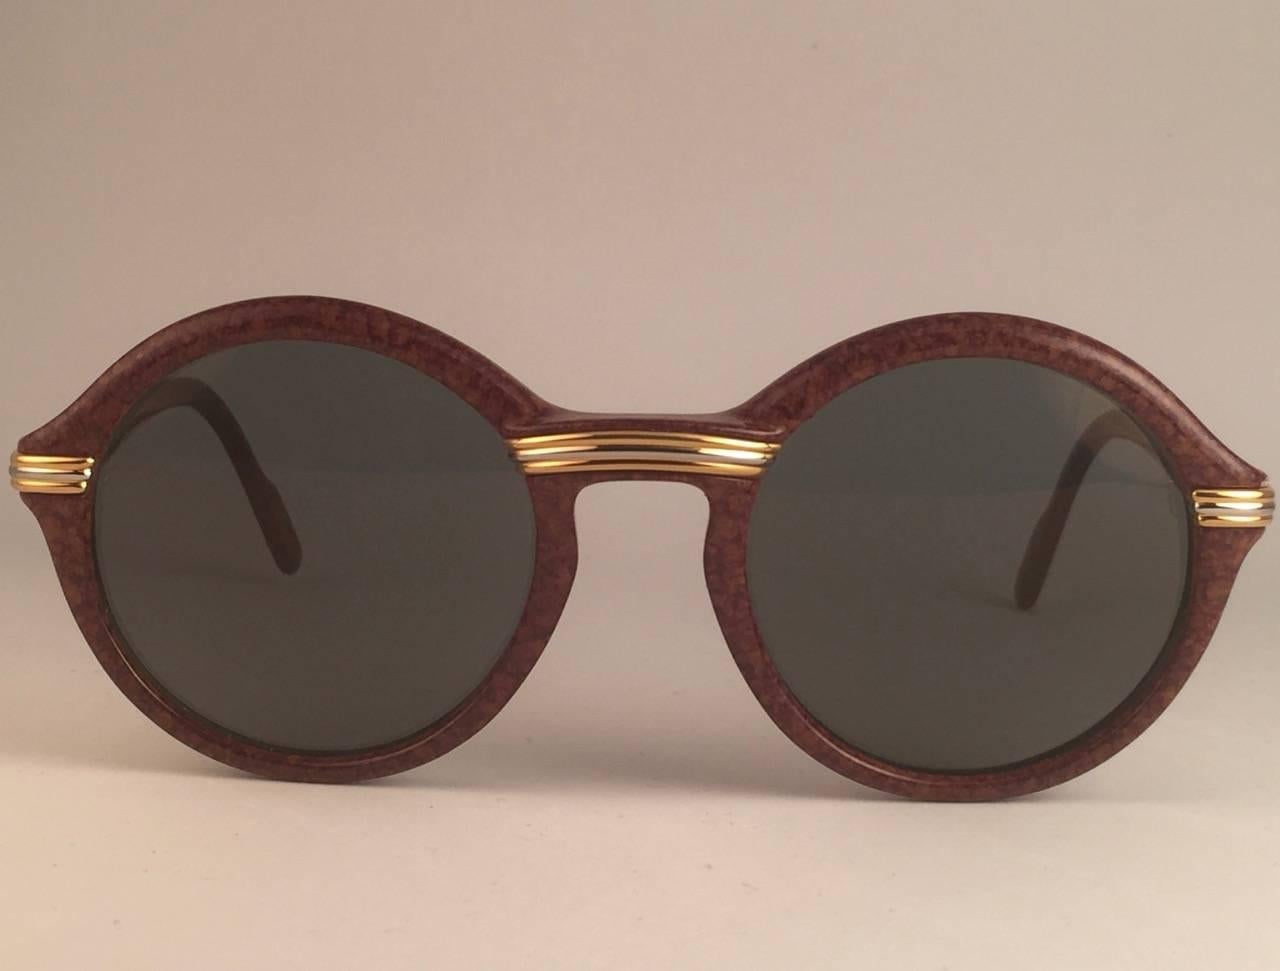 New 1991 Original Cartier Cabriolet Art Deco sunglasses with slight gold mirror ( uv protection ) lenses. 
Frame has the famous real gold and white gold accents in the middle and on the sides.  All hallmarks. Cartier gold signs on the earpaddles.